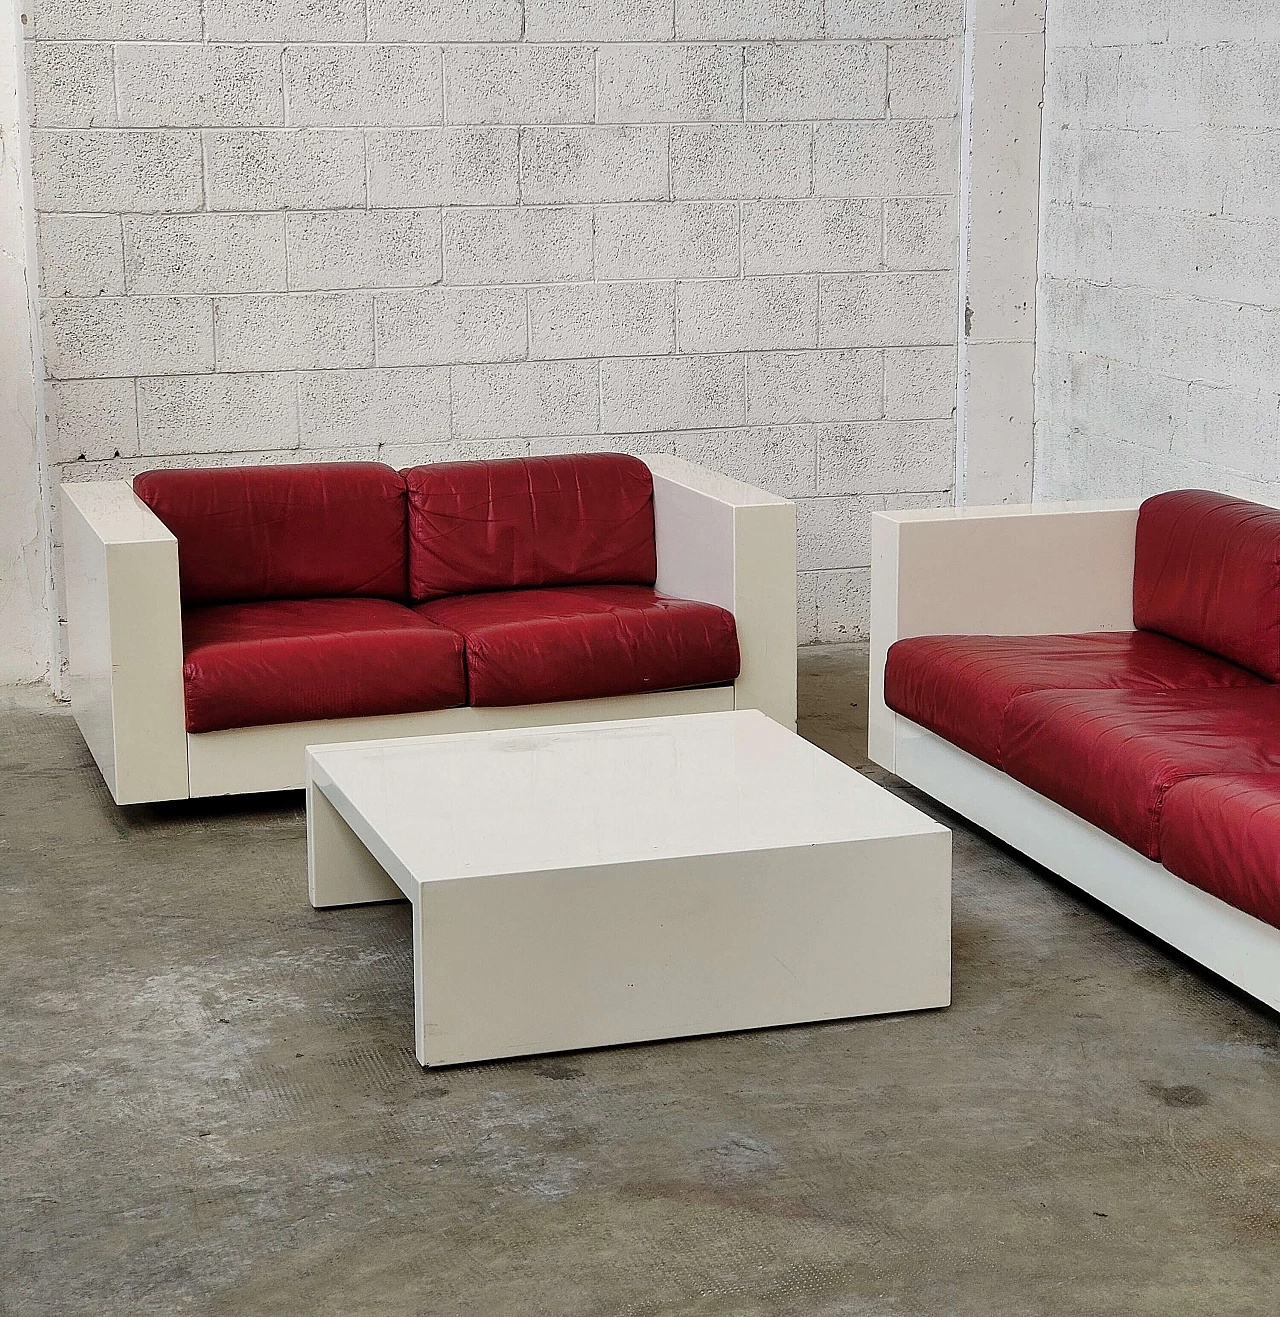 Pair of Saratoga sofas and coffee table by Lella and Massimo Vignelli for Saratoga, 1964 5